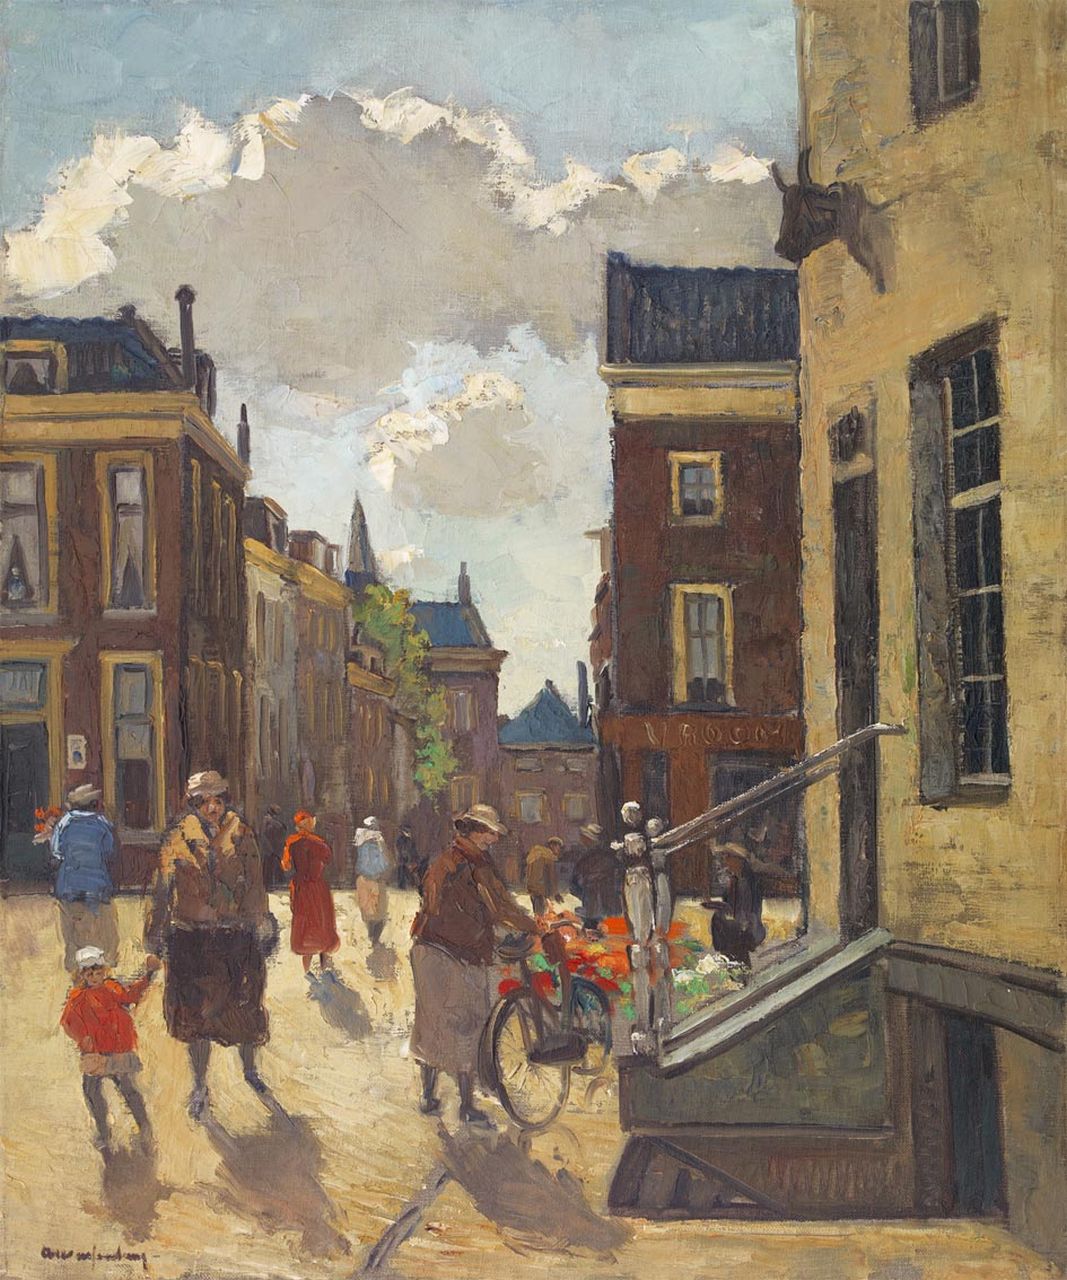 Wassenburg A.  | Arie Wassenburg, A sunny day at the Cameretten, Delft, oil on canvas laid down on board 60.5 x 50.3 cm, signed l.l.